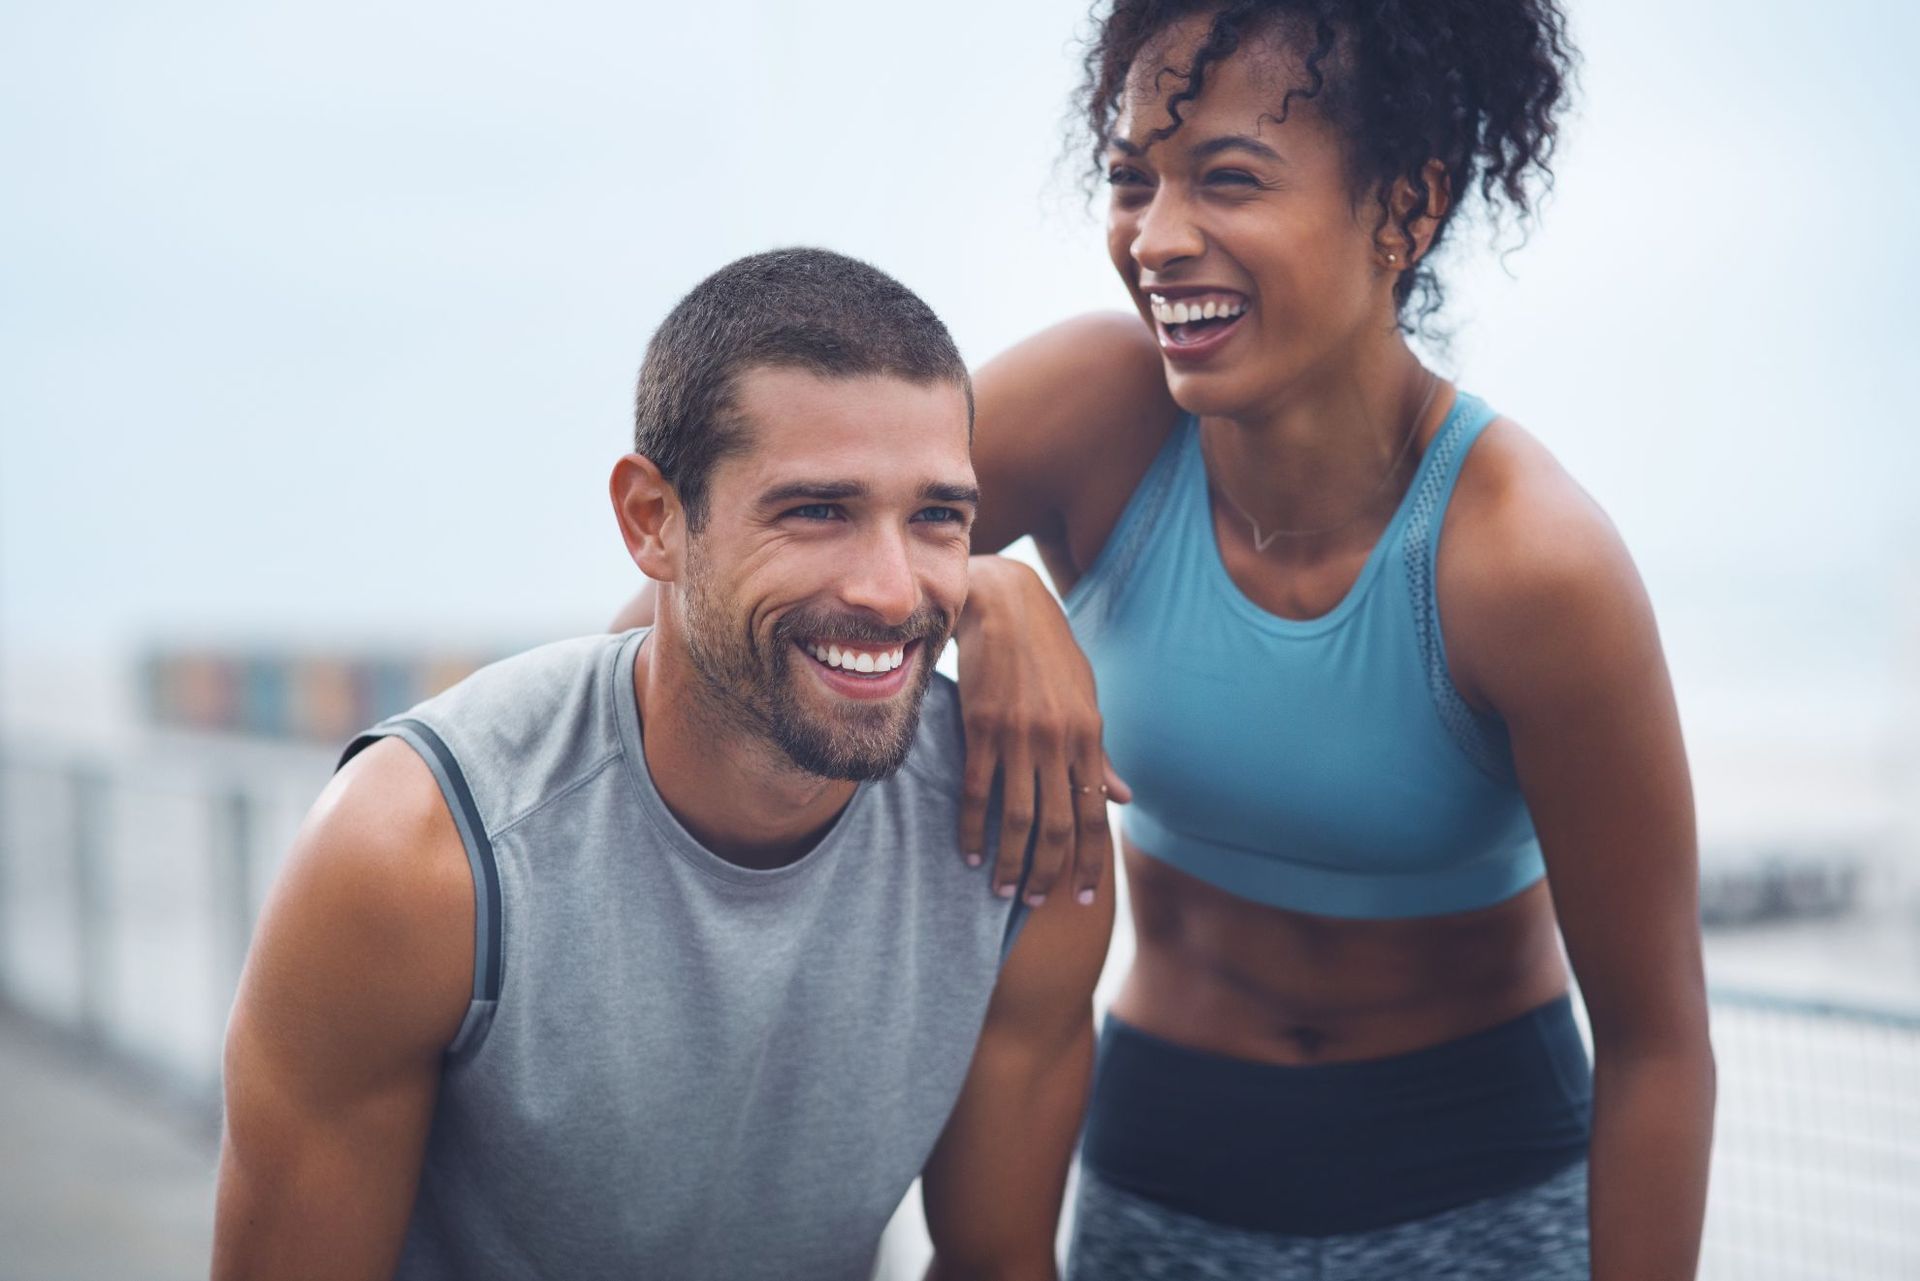 athletic man and woman laughing together